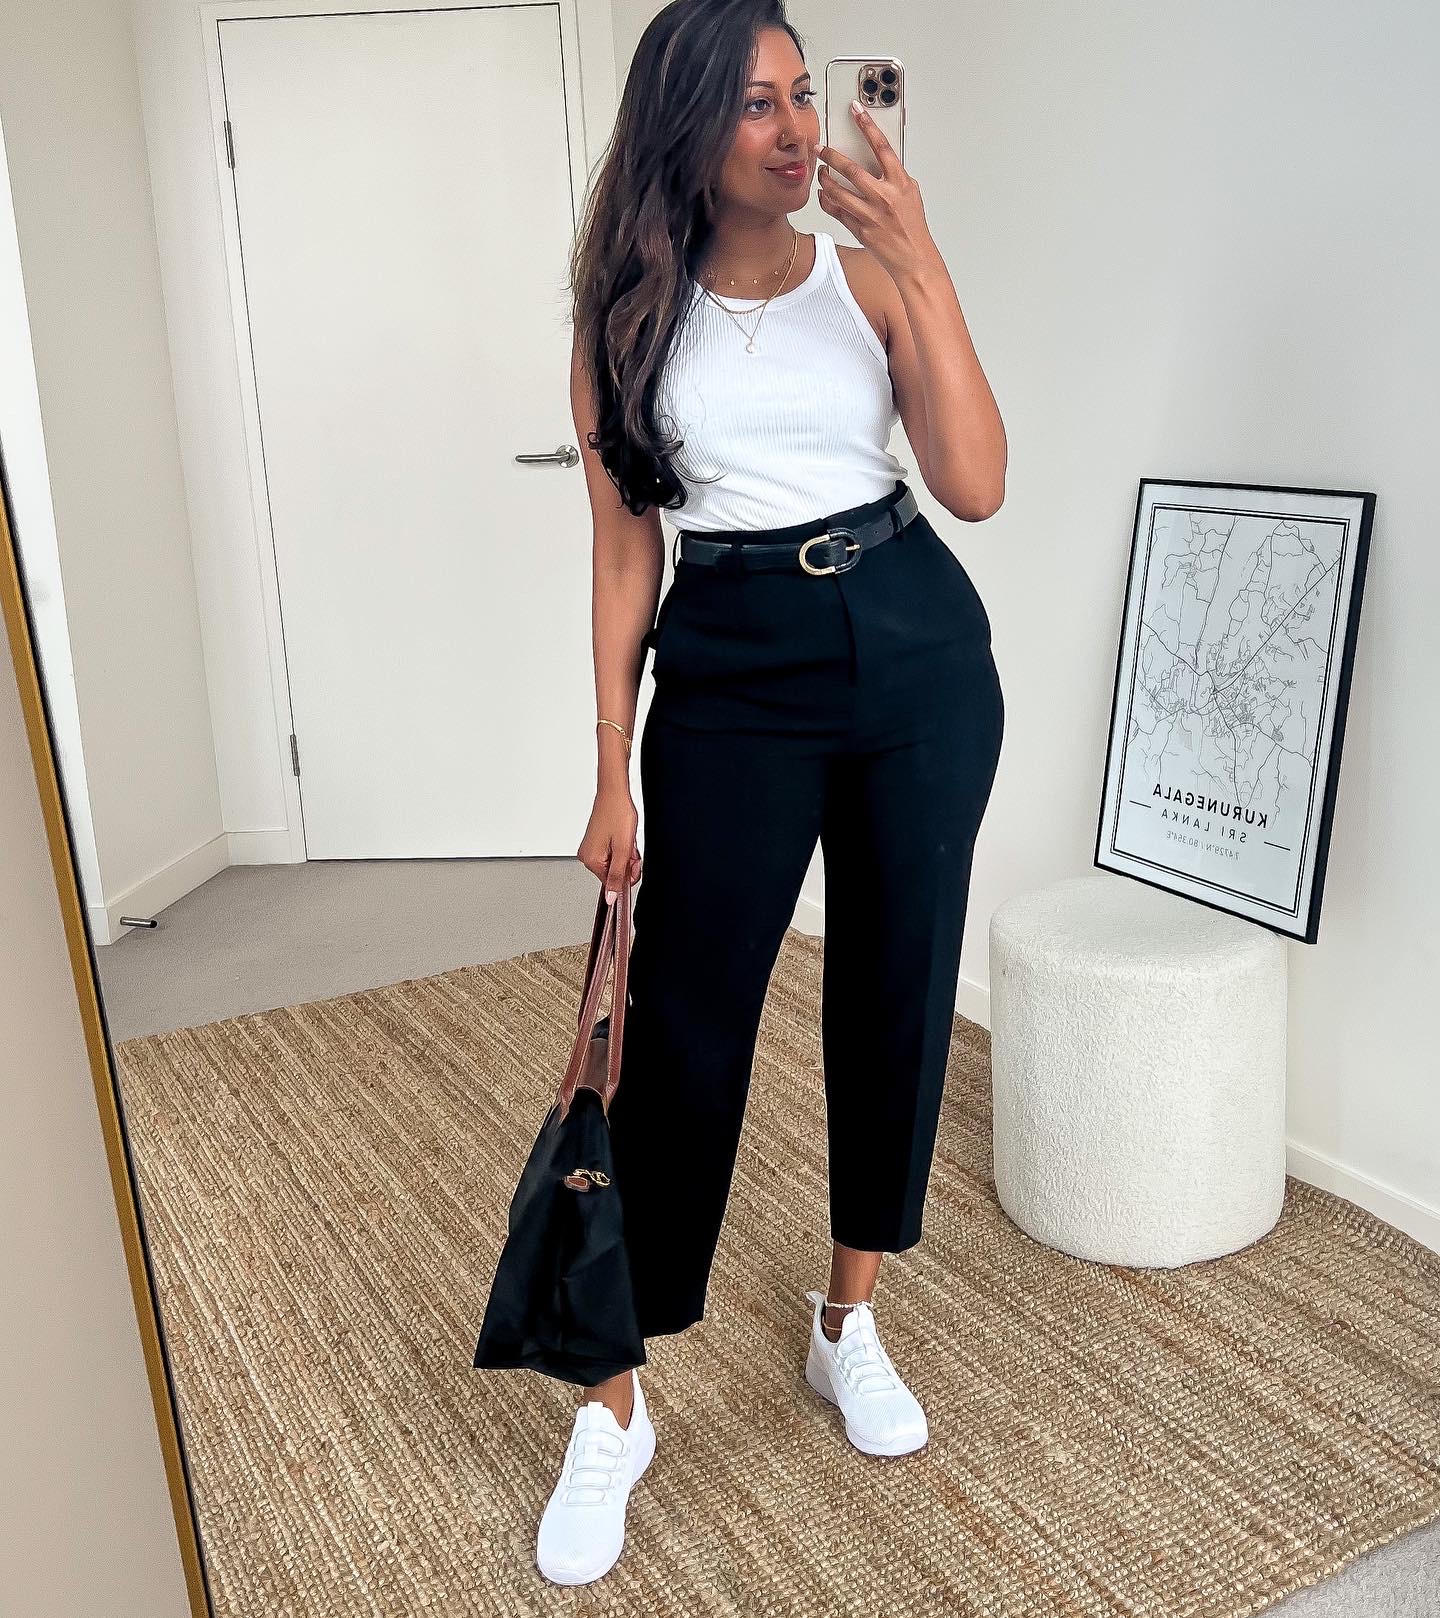 Tina wearing a white tank top, black tailored pants and white sneakers